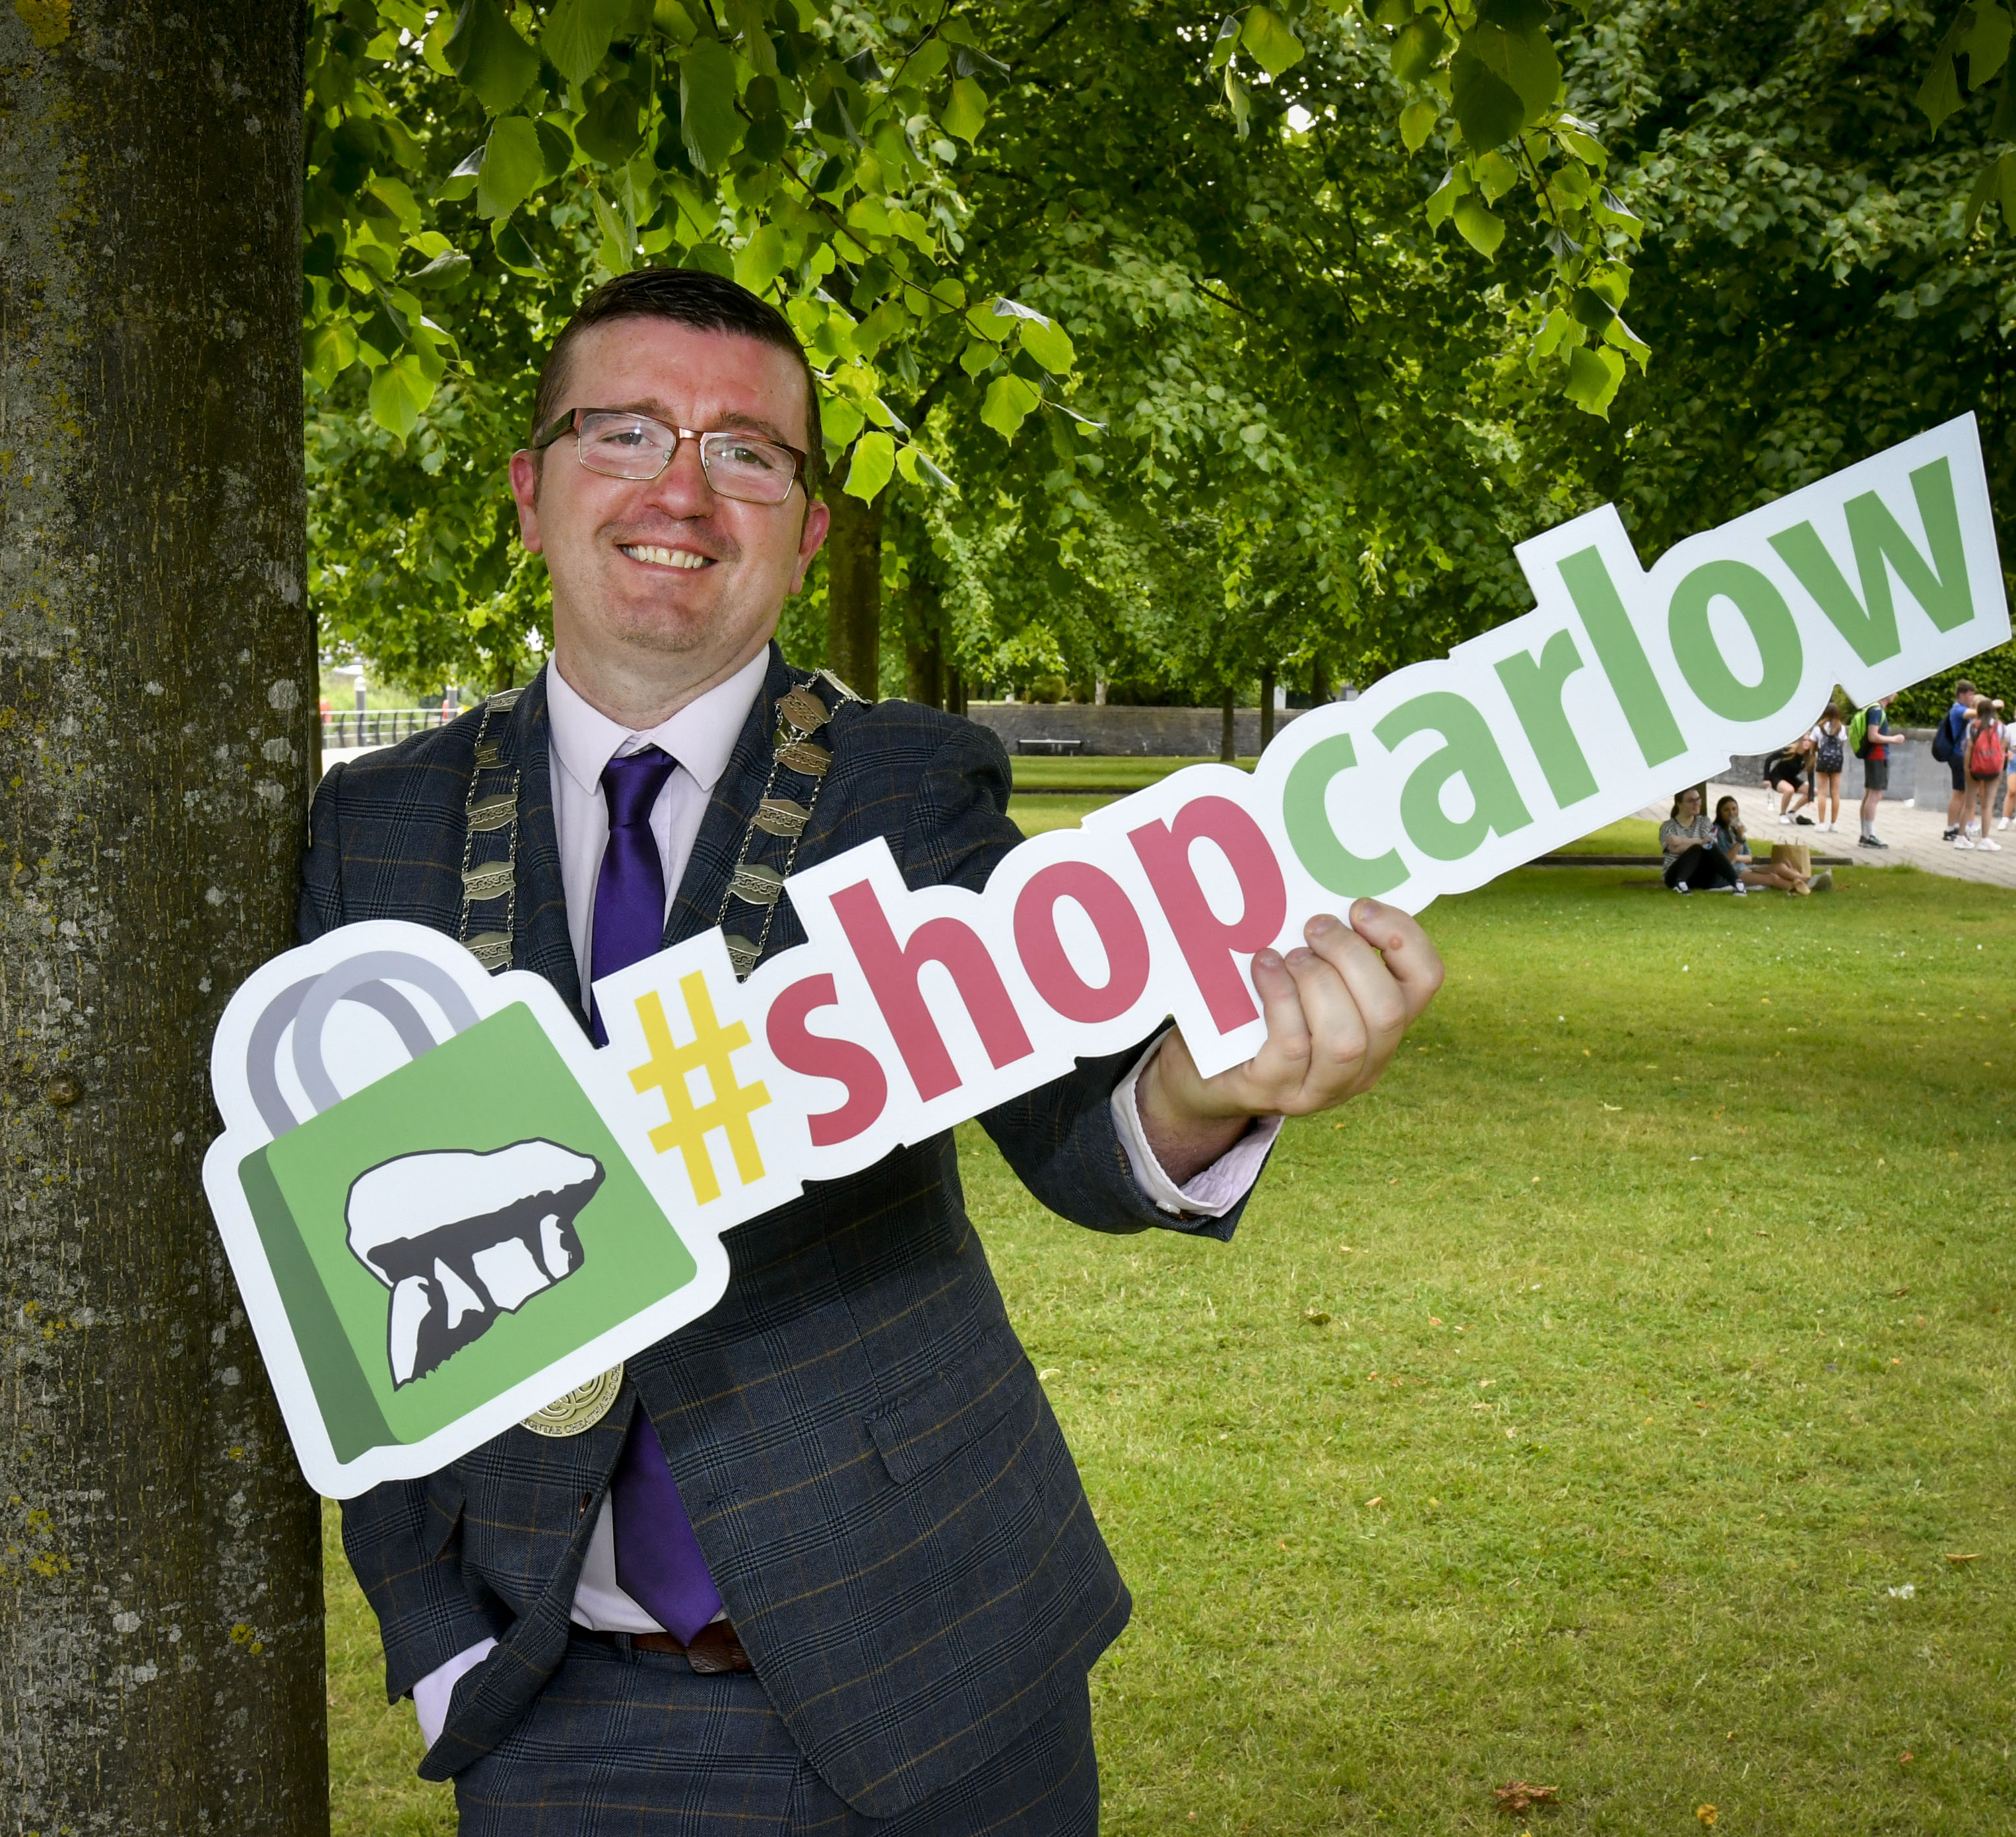 96% NOW LIKELY TO ‘LOOK FOR LOCAL’ IN CARLOW